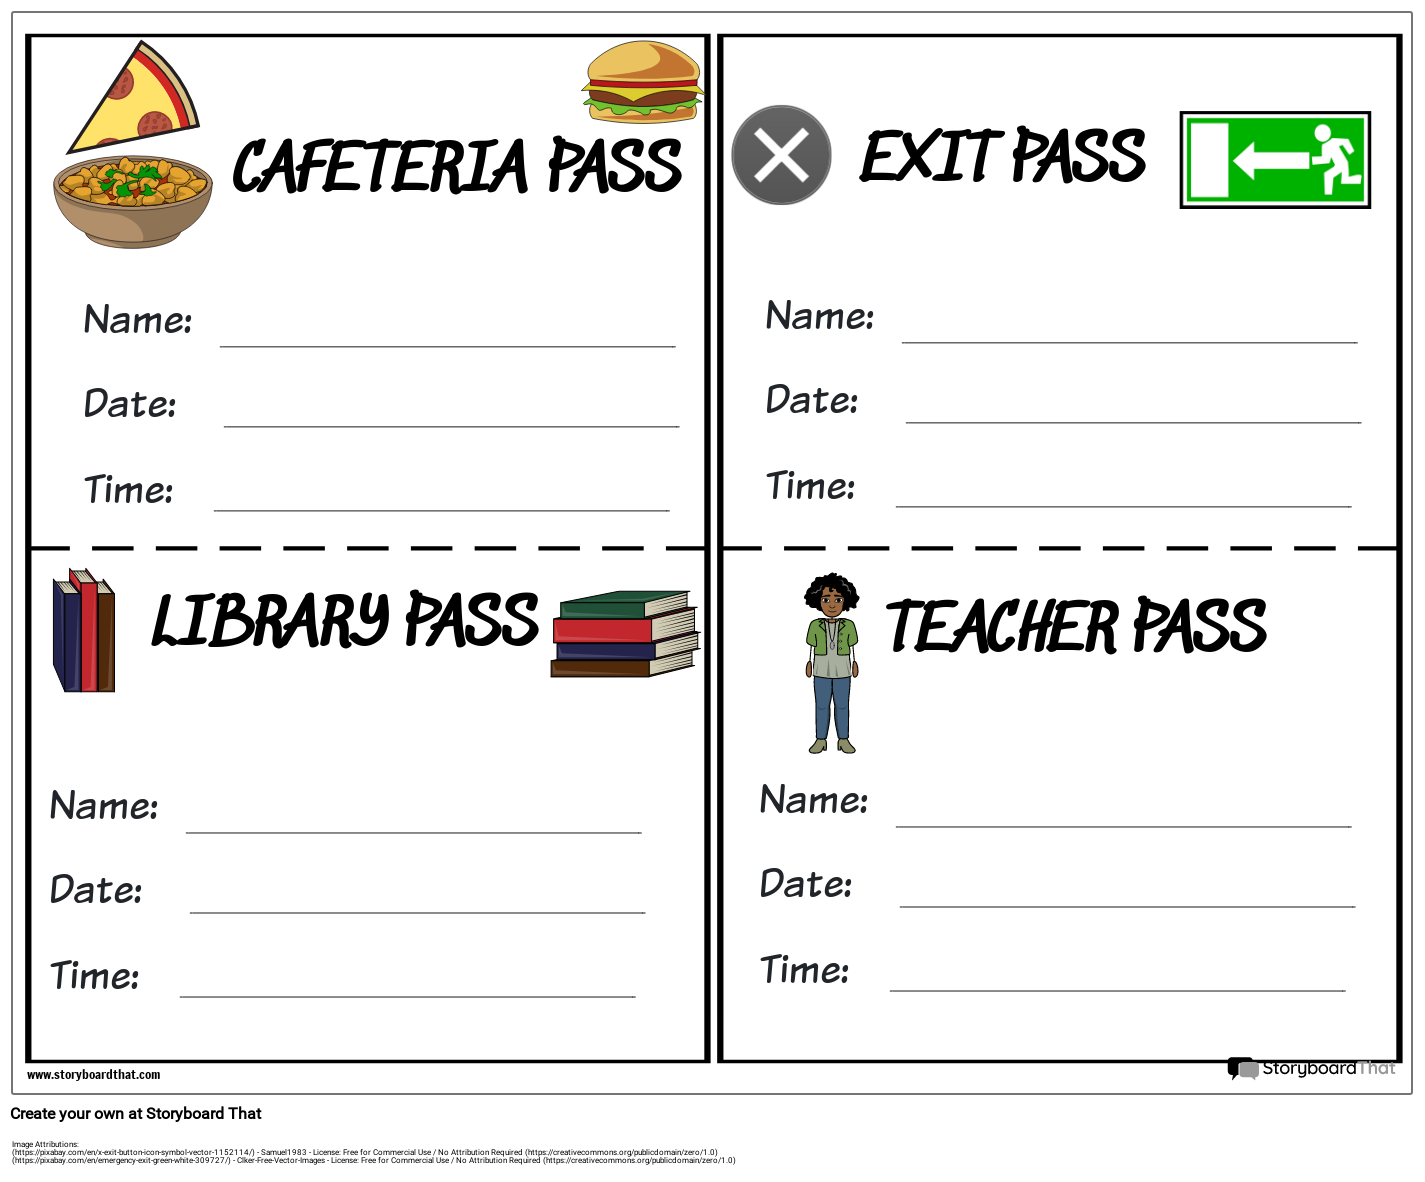 School Hall Passes with Icons